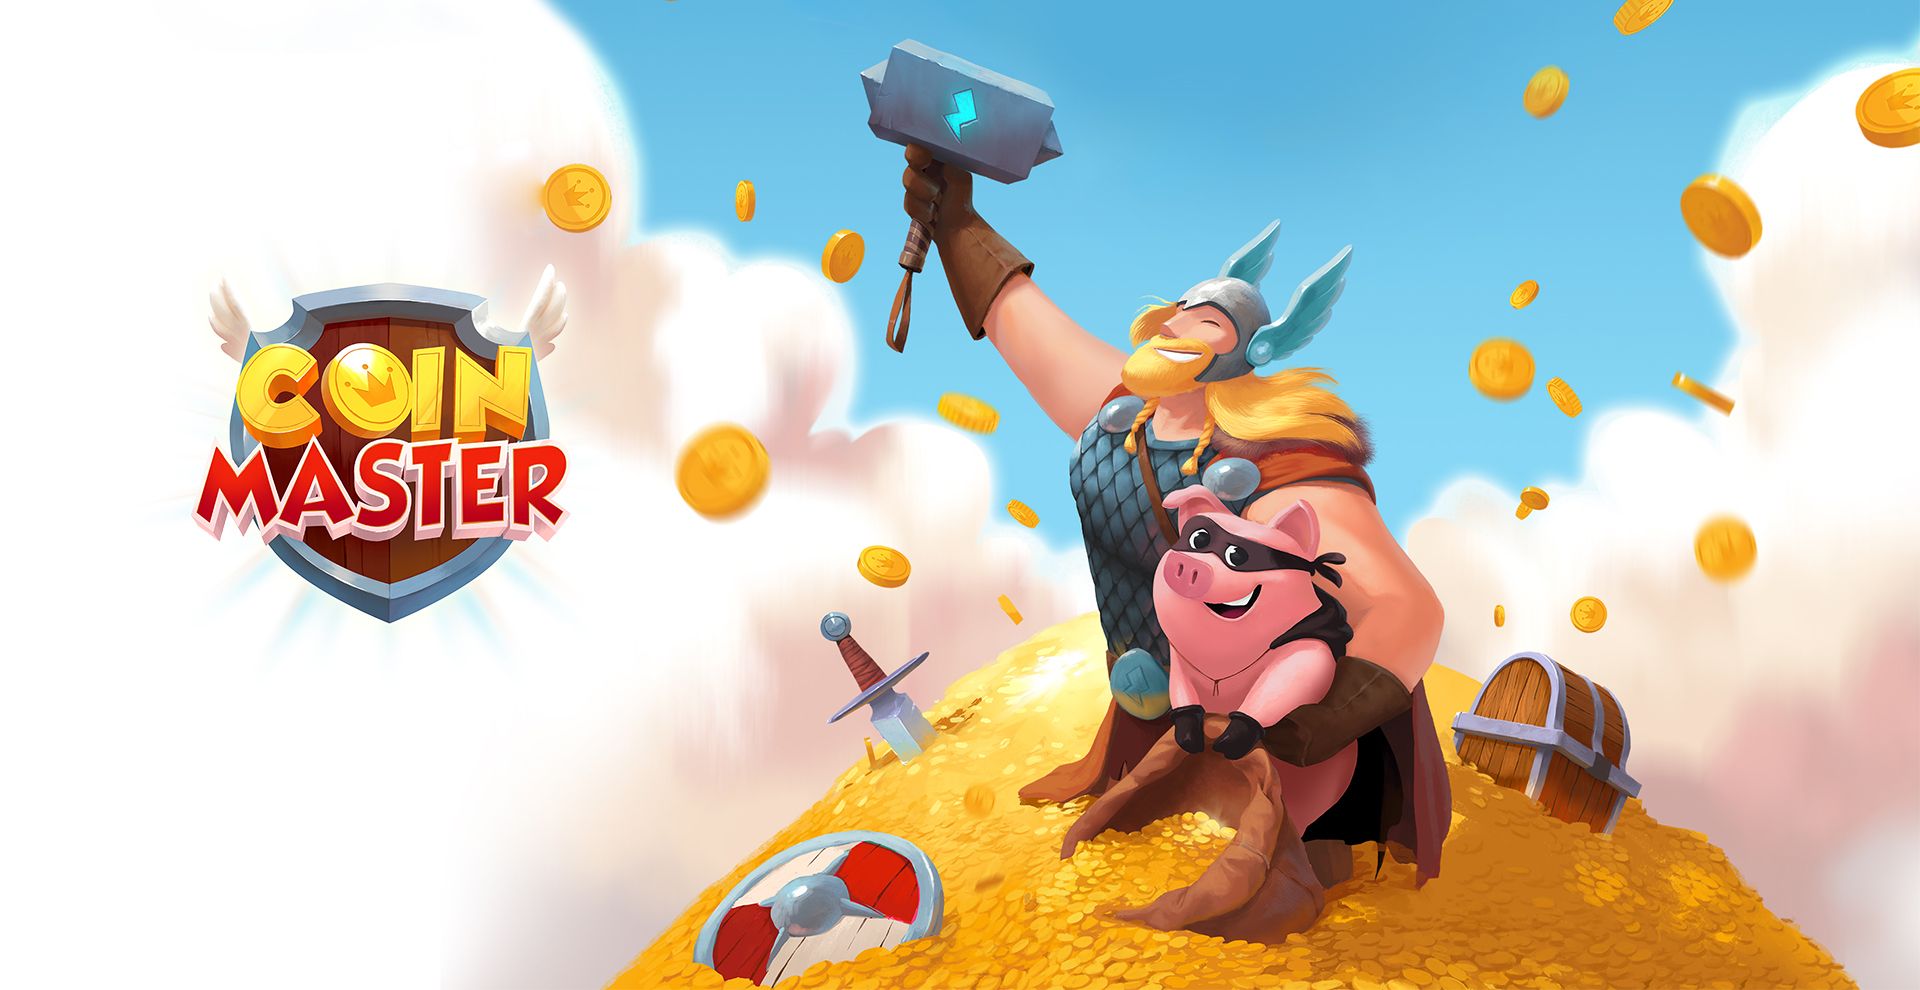 Coin master daily free coins and spins online